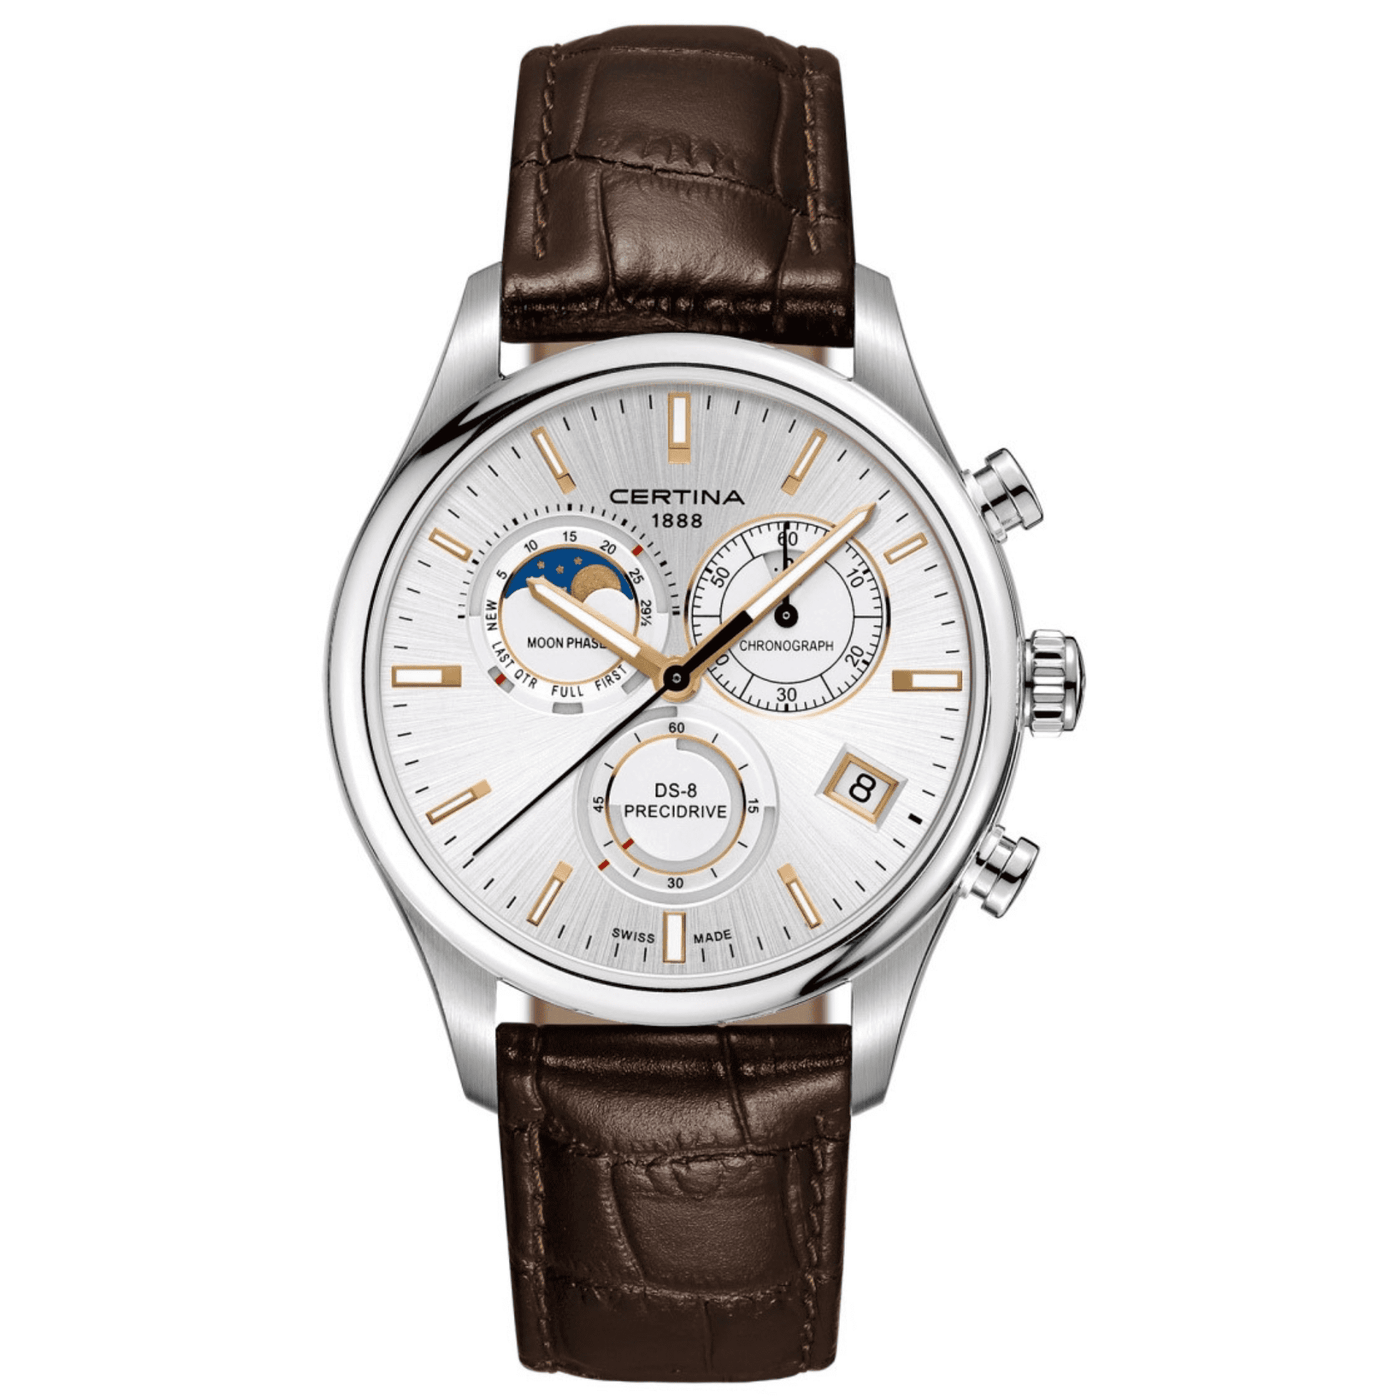 DS-8 Chronograph Moon Phase